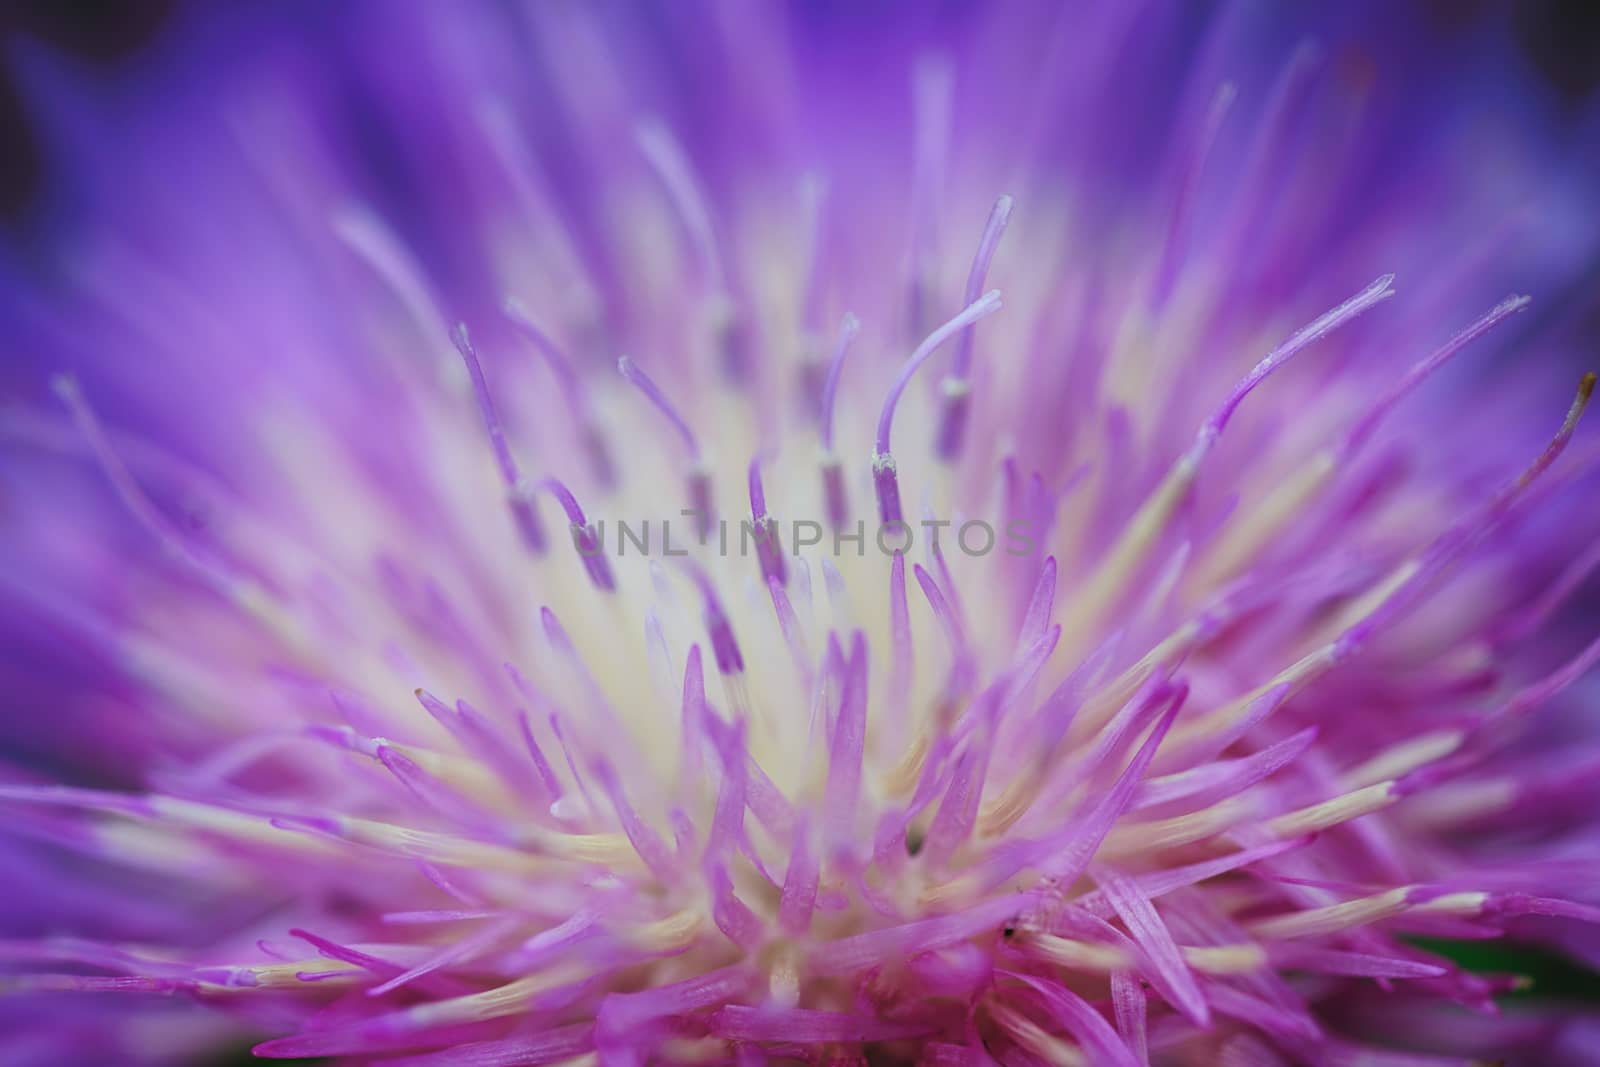 The violet petals of the flower abstract pictures